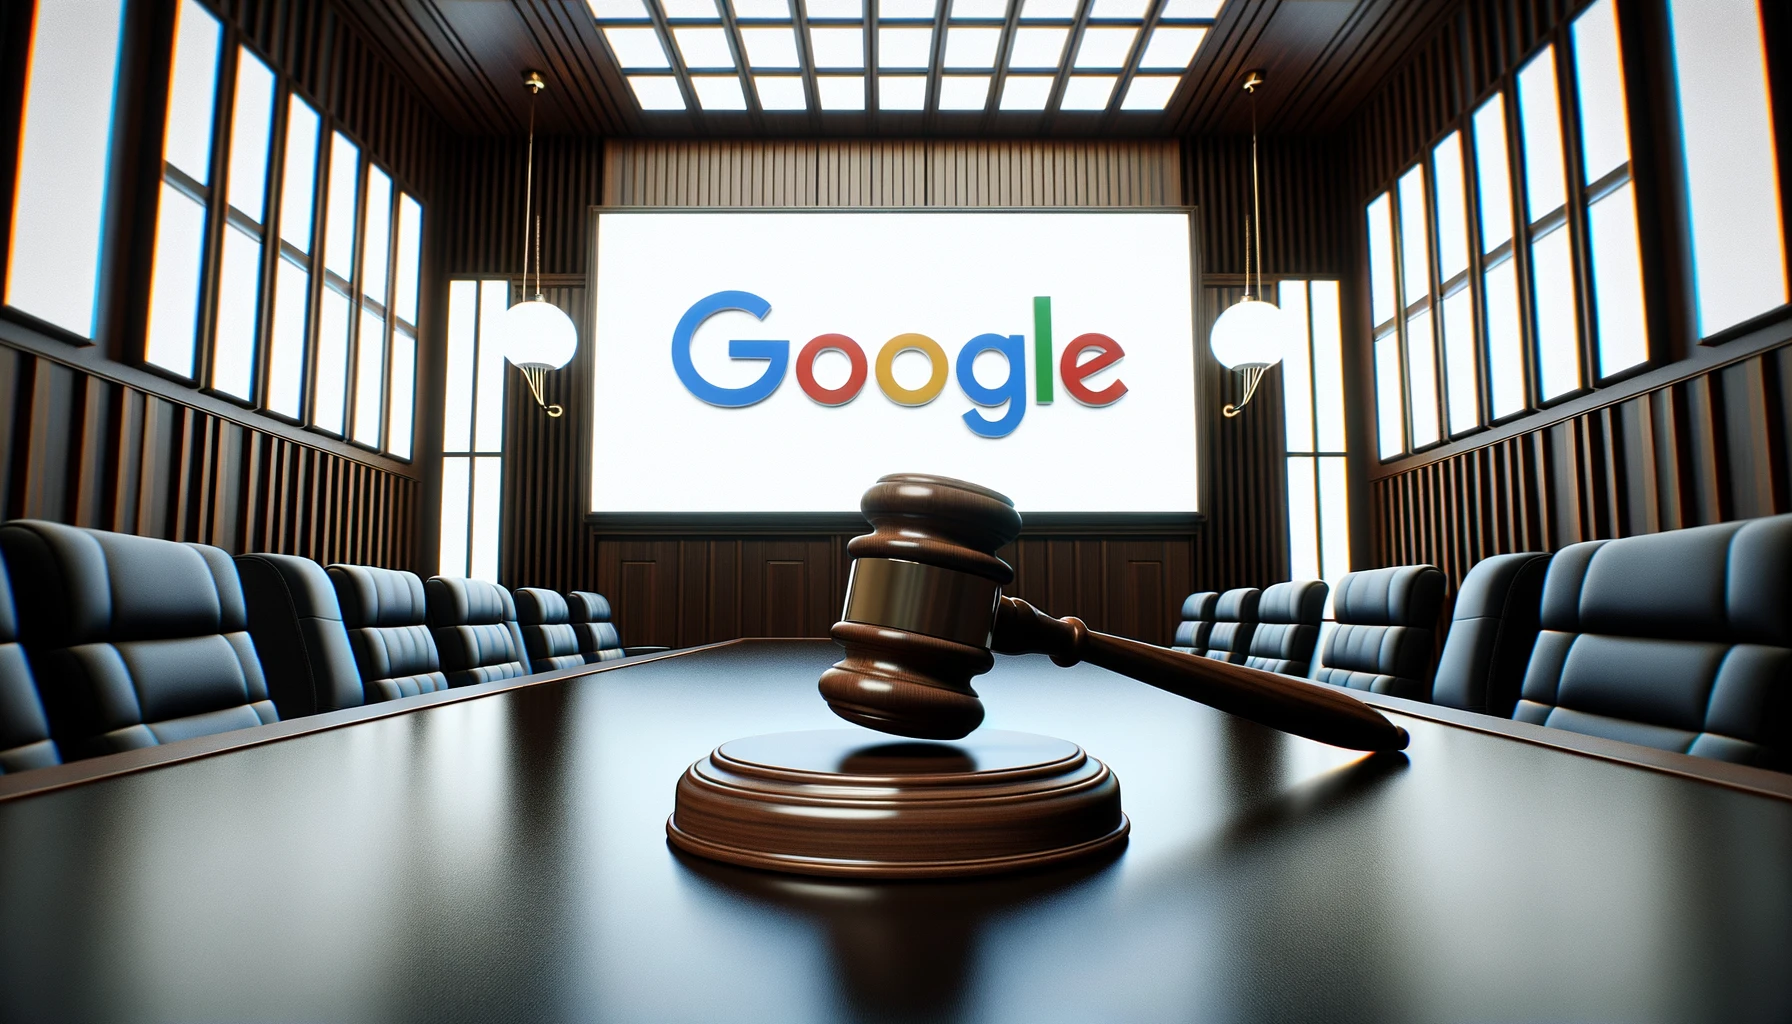 A David vs. Goliath Tale: Can Google's Reign Over Internet Search Be Challenged?